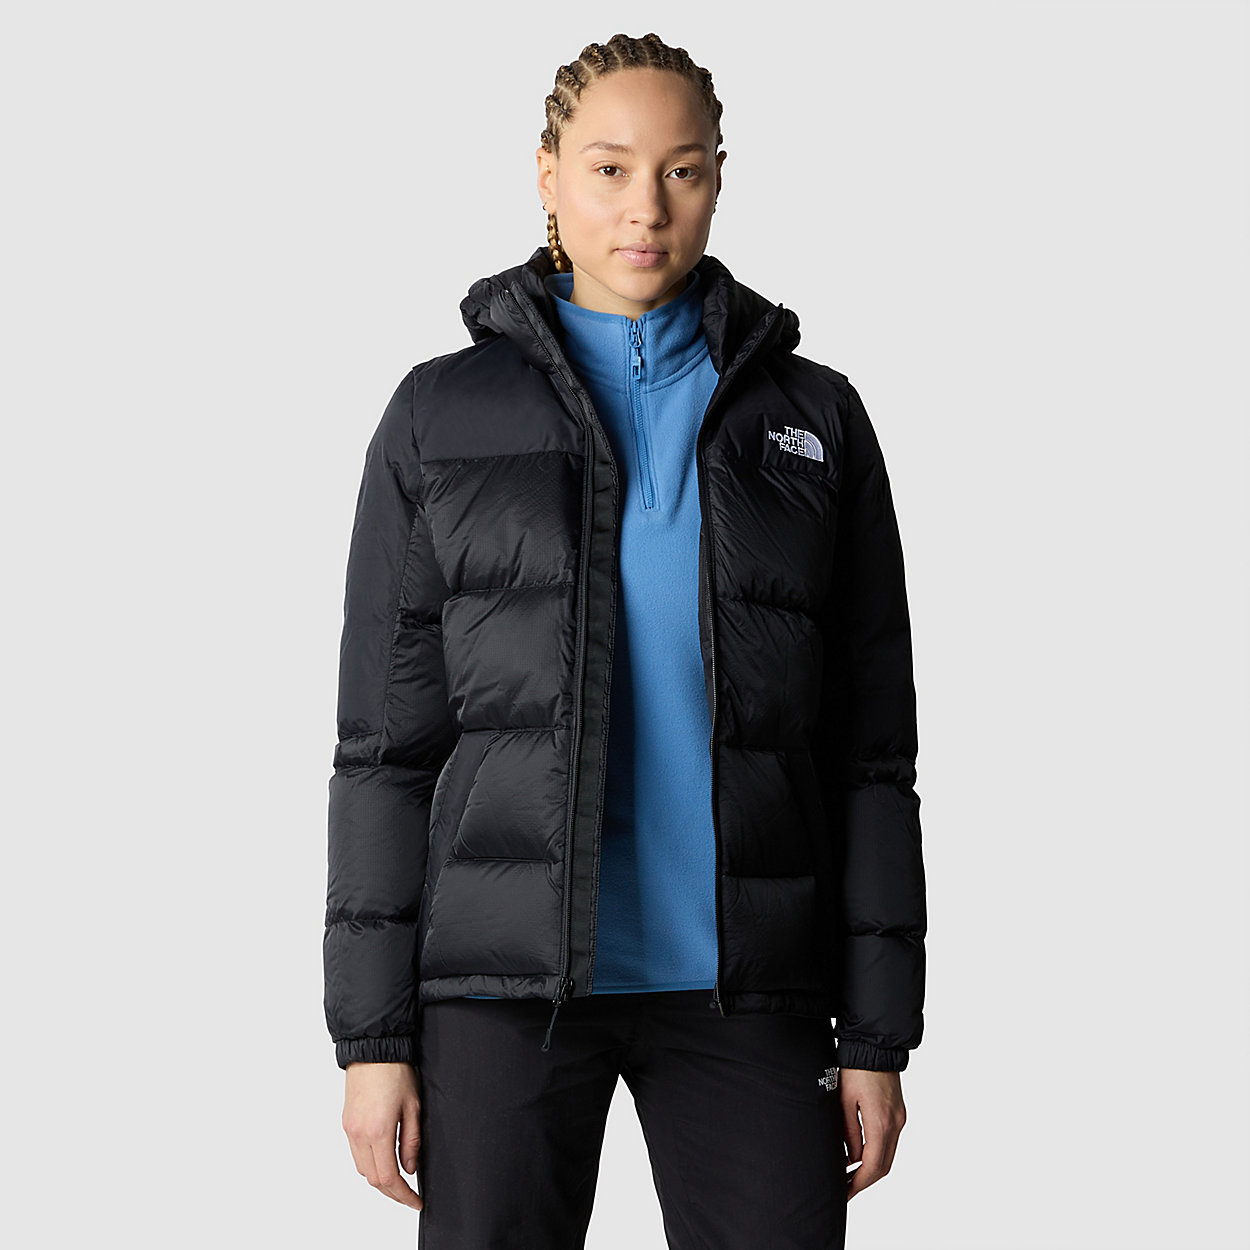 Unlock Wilderness' choice in the Trespass Vs North Face comparison, the Diablo Hooded Down Jacket by The North Face